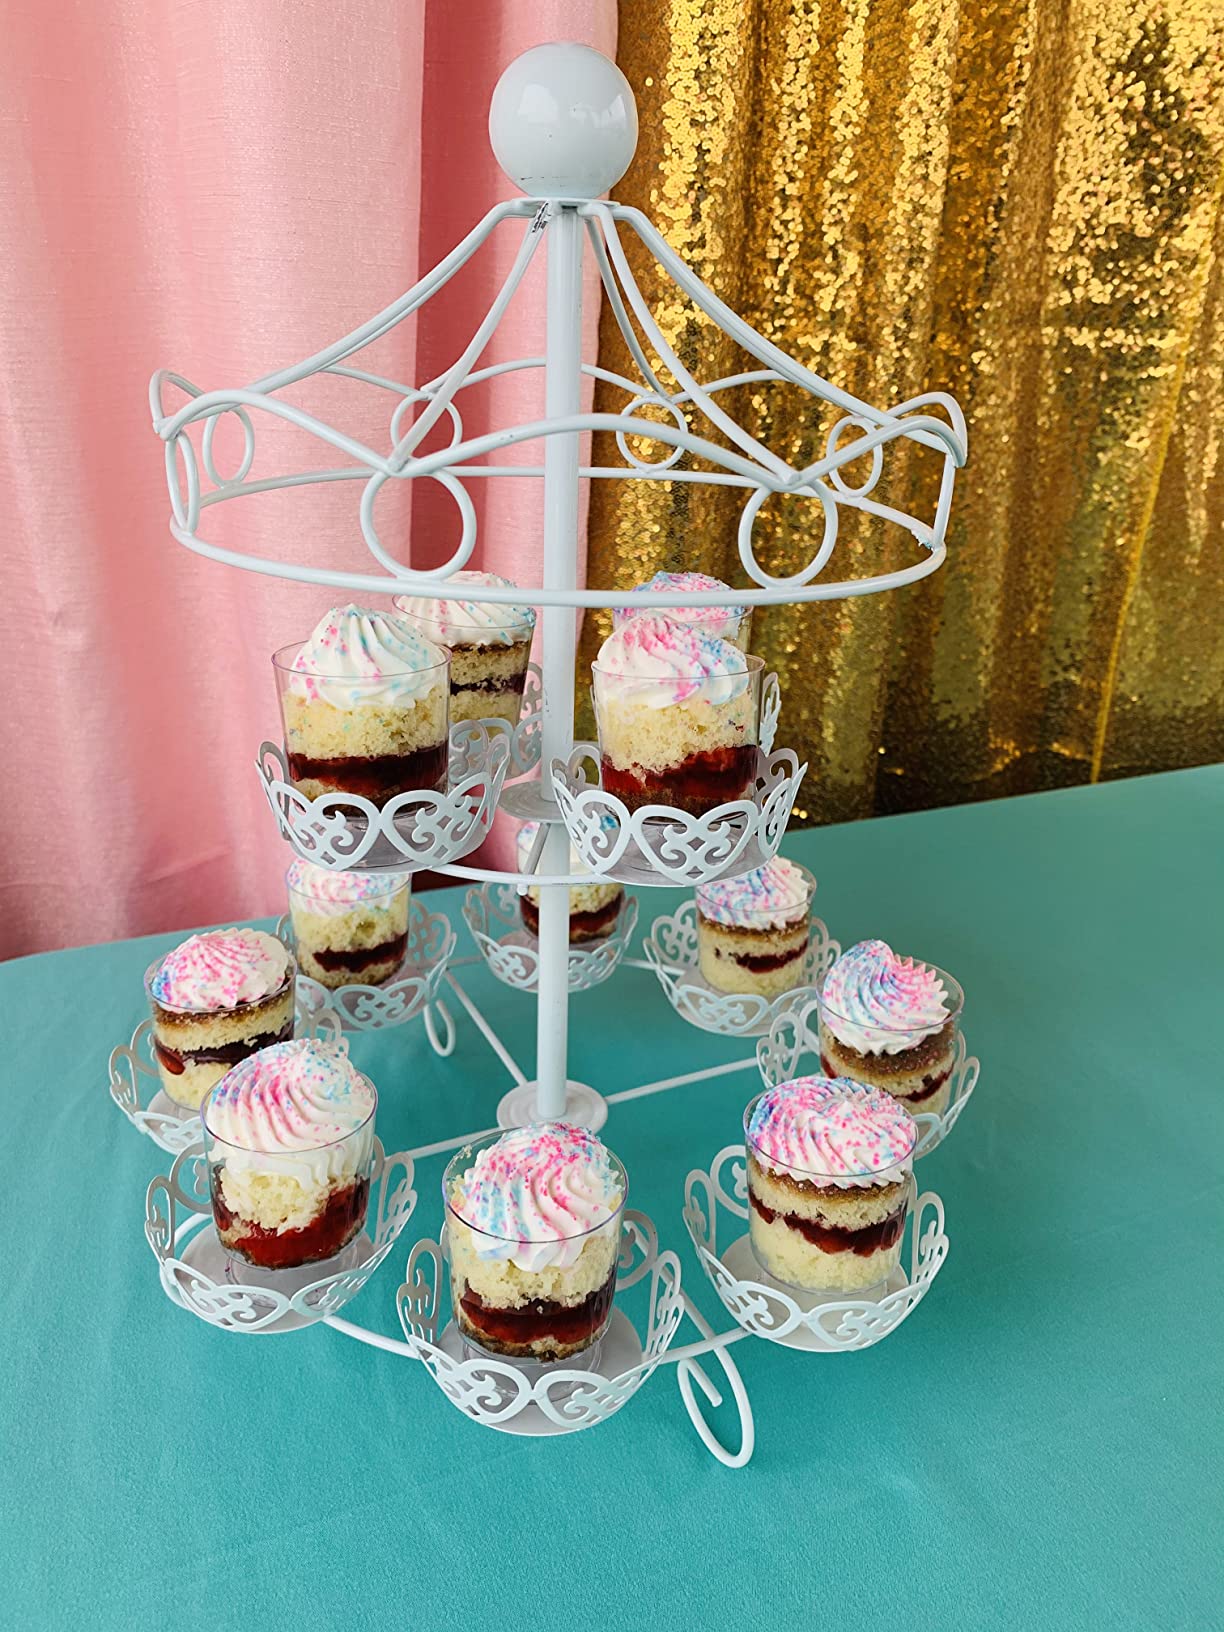 Carousel Cupcake Stand White 2-Tier Metal Carousel Cupcake Holder Display for Cupcakes Holiday Birthday Wedding Party Decor